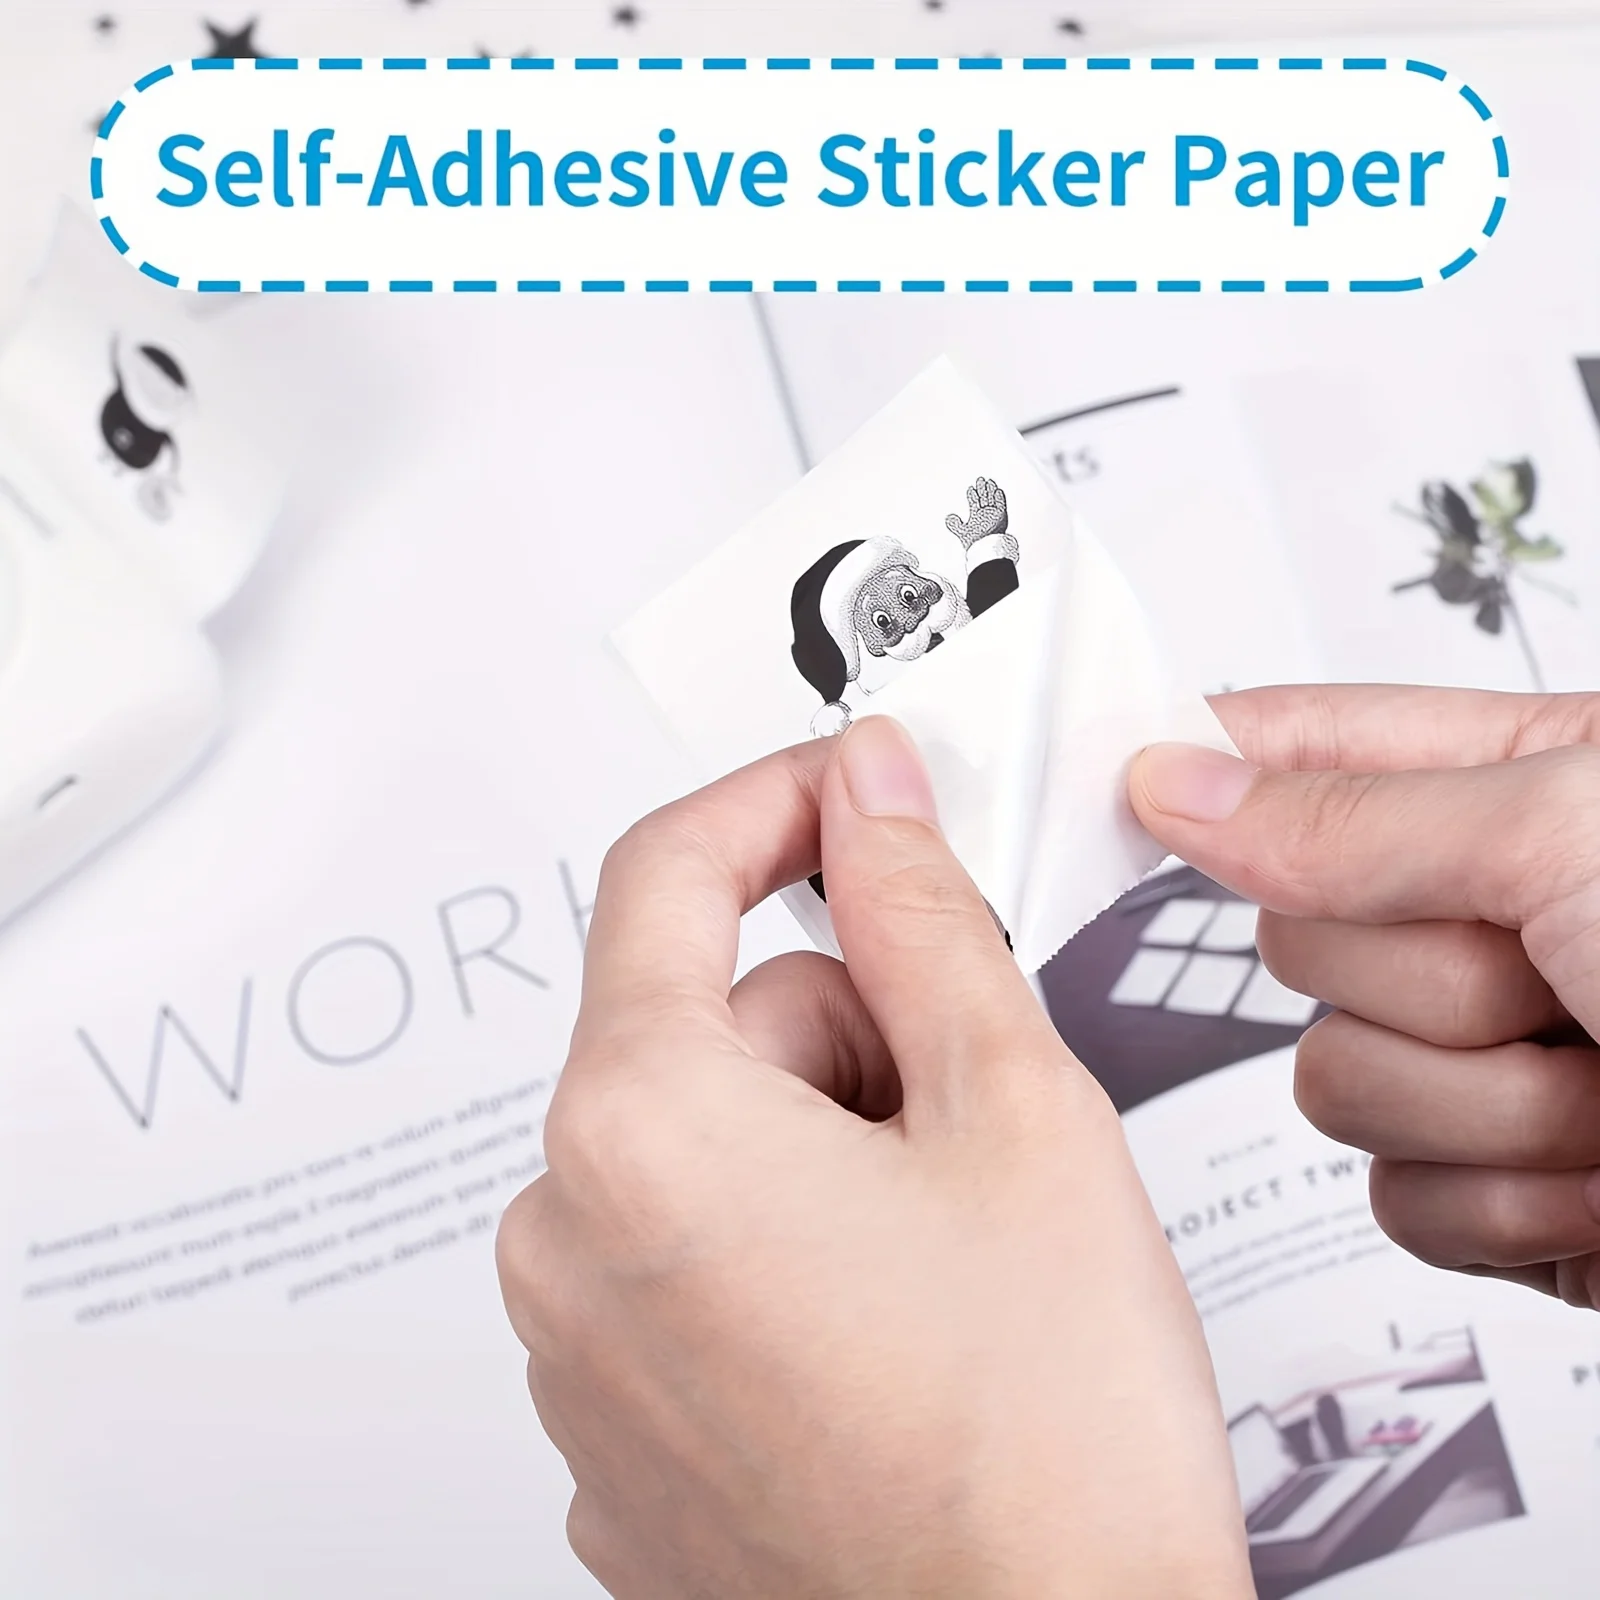 Mini Printer Paper Thermal Label Sticker Colorful Adhesive Self-adhesive Paper For Wireless Photo Inkless Printer 57mm